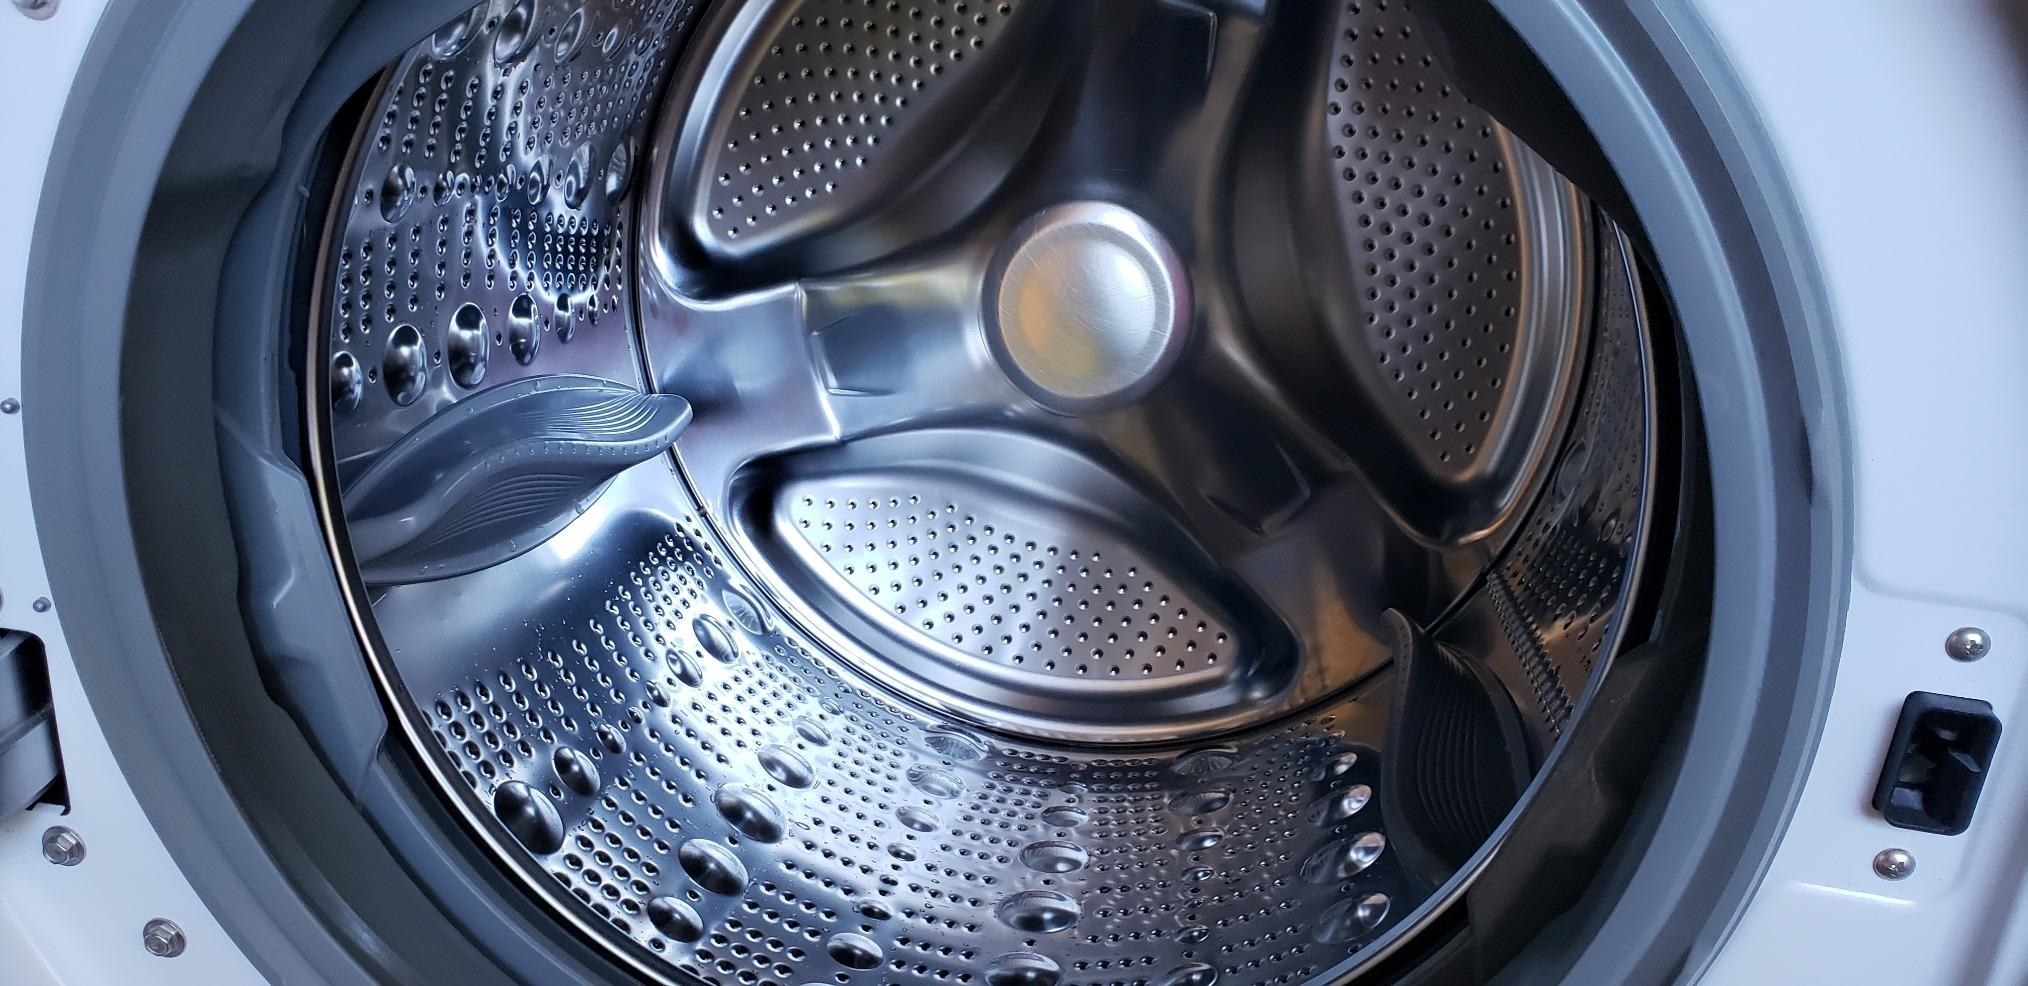 The inside of a washing machine looking super clean